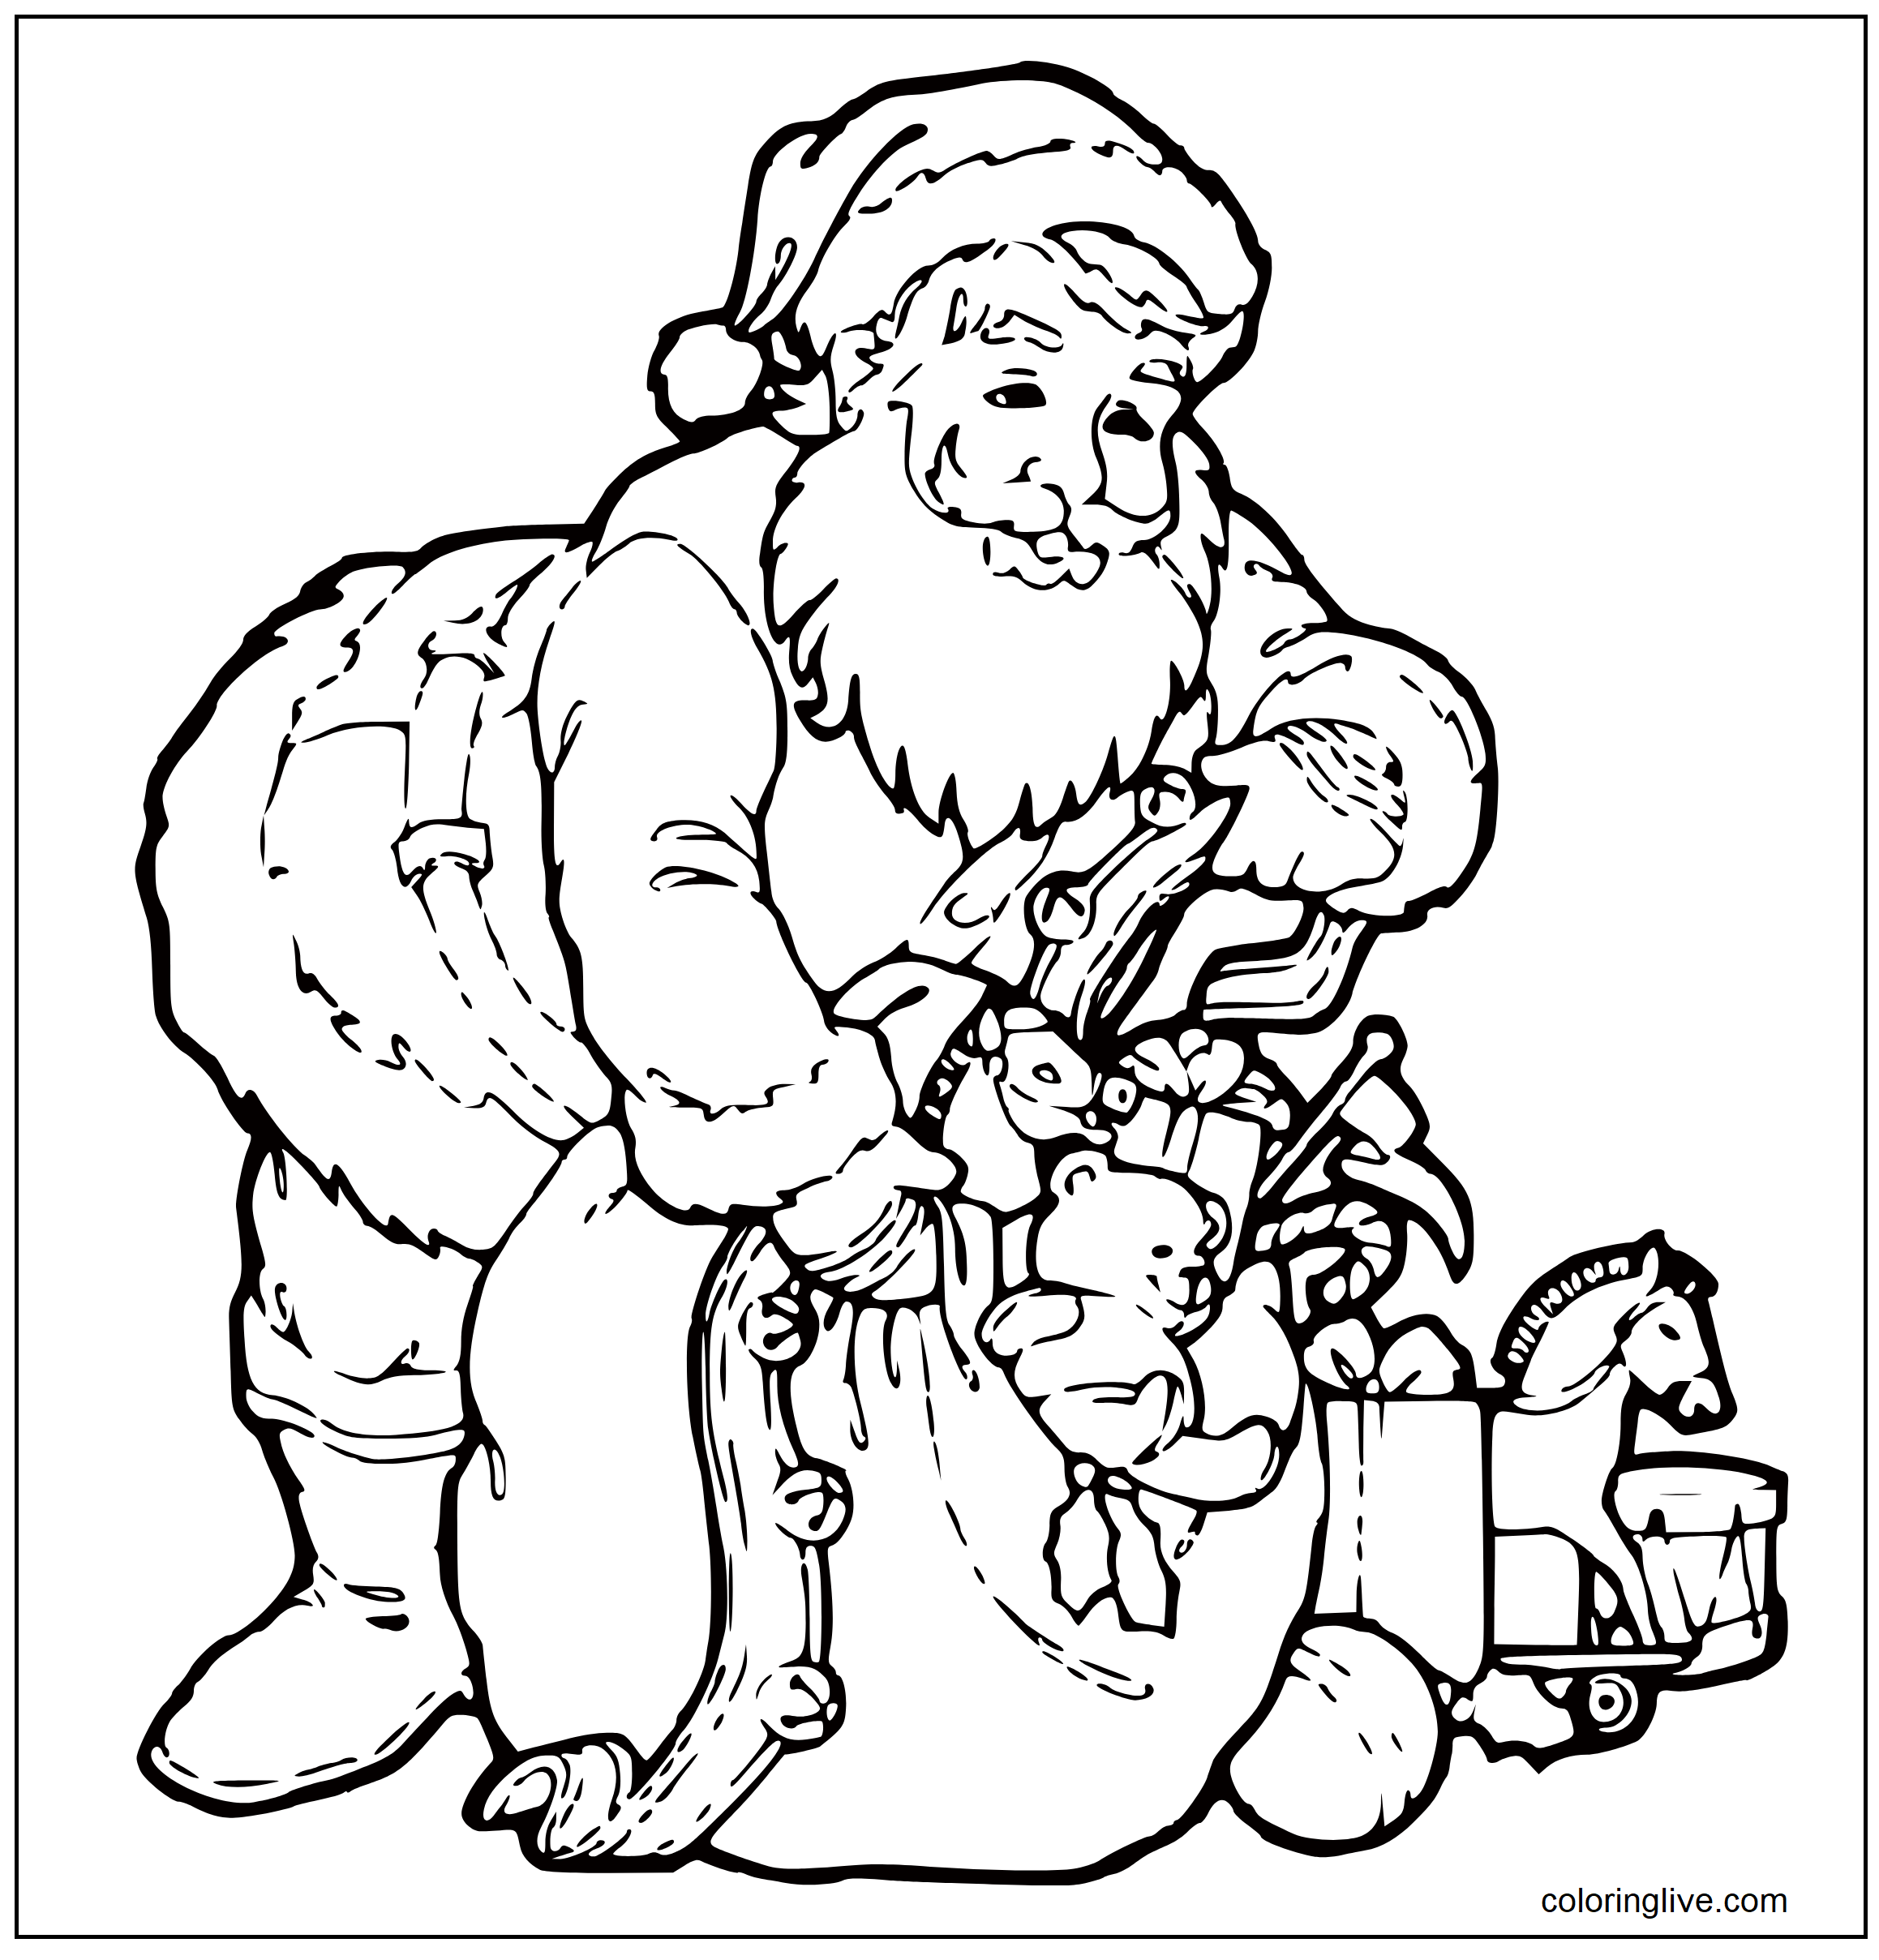 Printable Santa and his presents Coloring Page for kids.